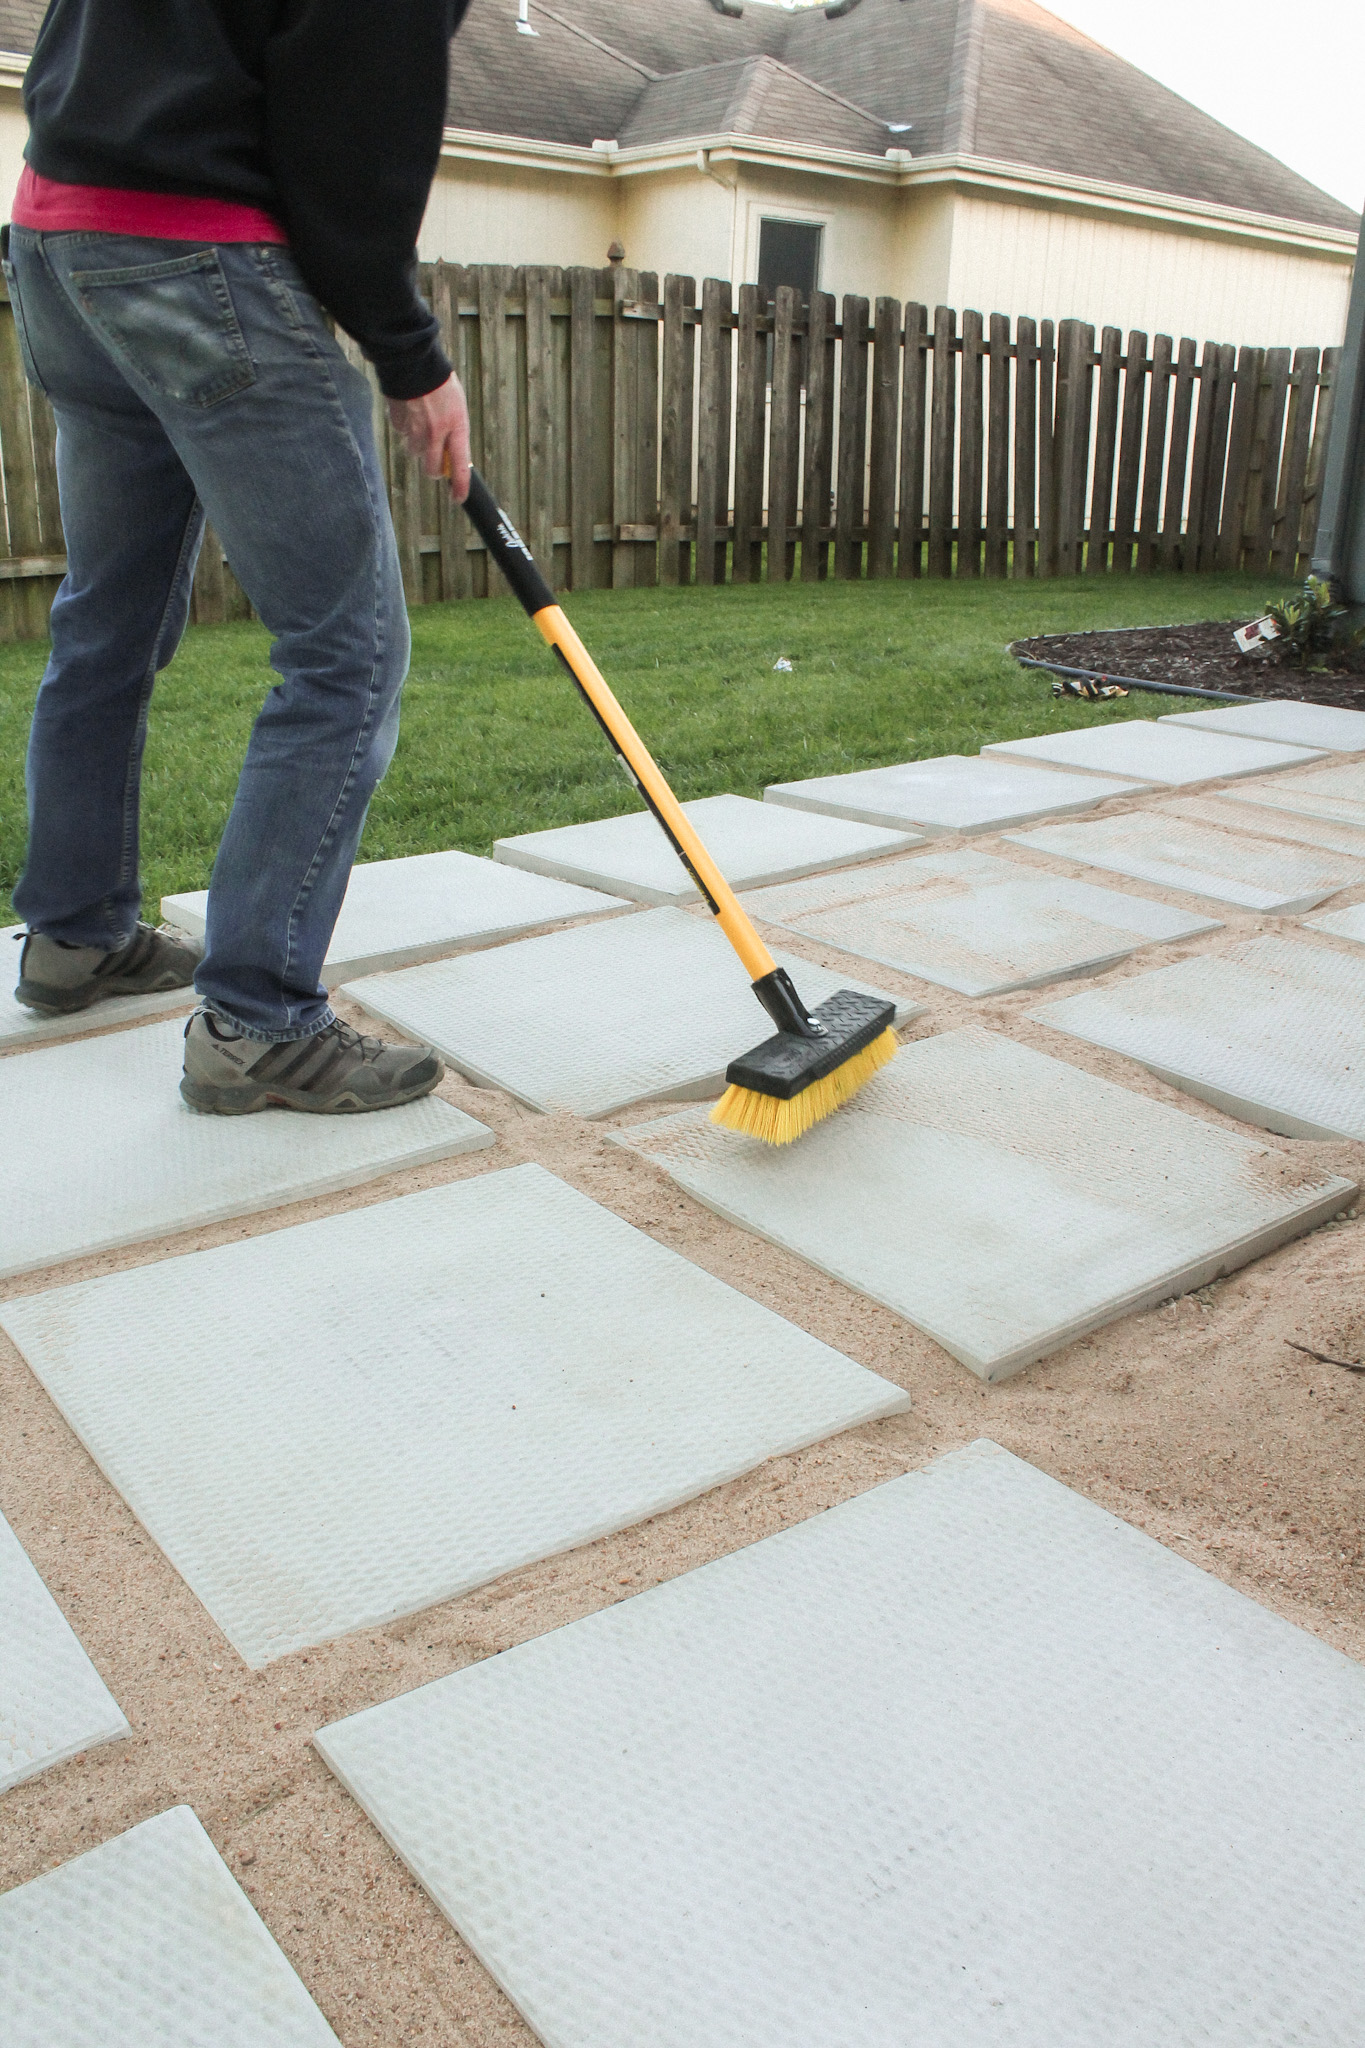 Diy Patio With Grass Between Pavers And A Fire Pit - Diy Paver Patio On Grass